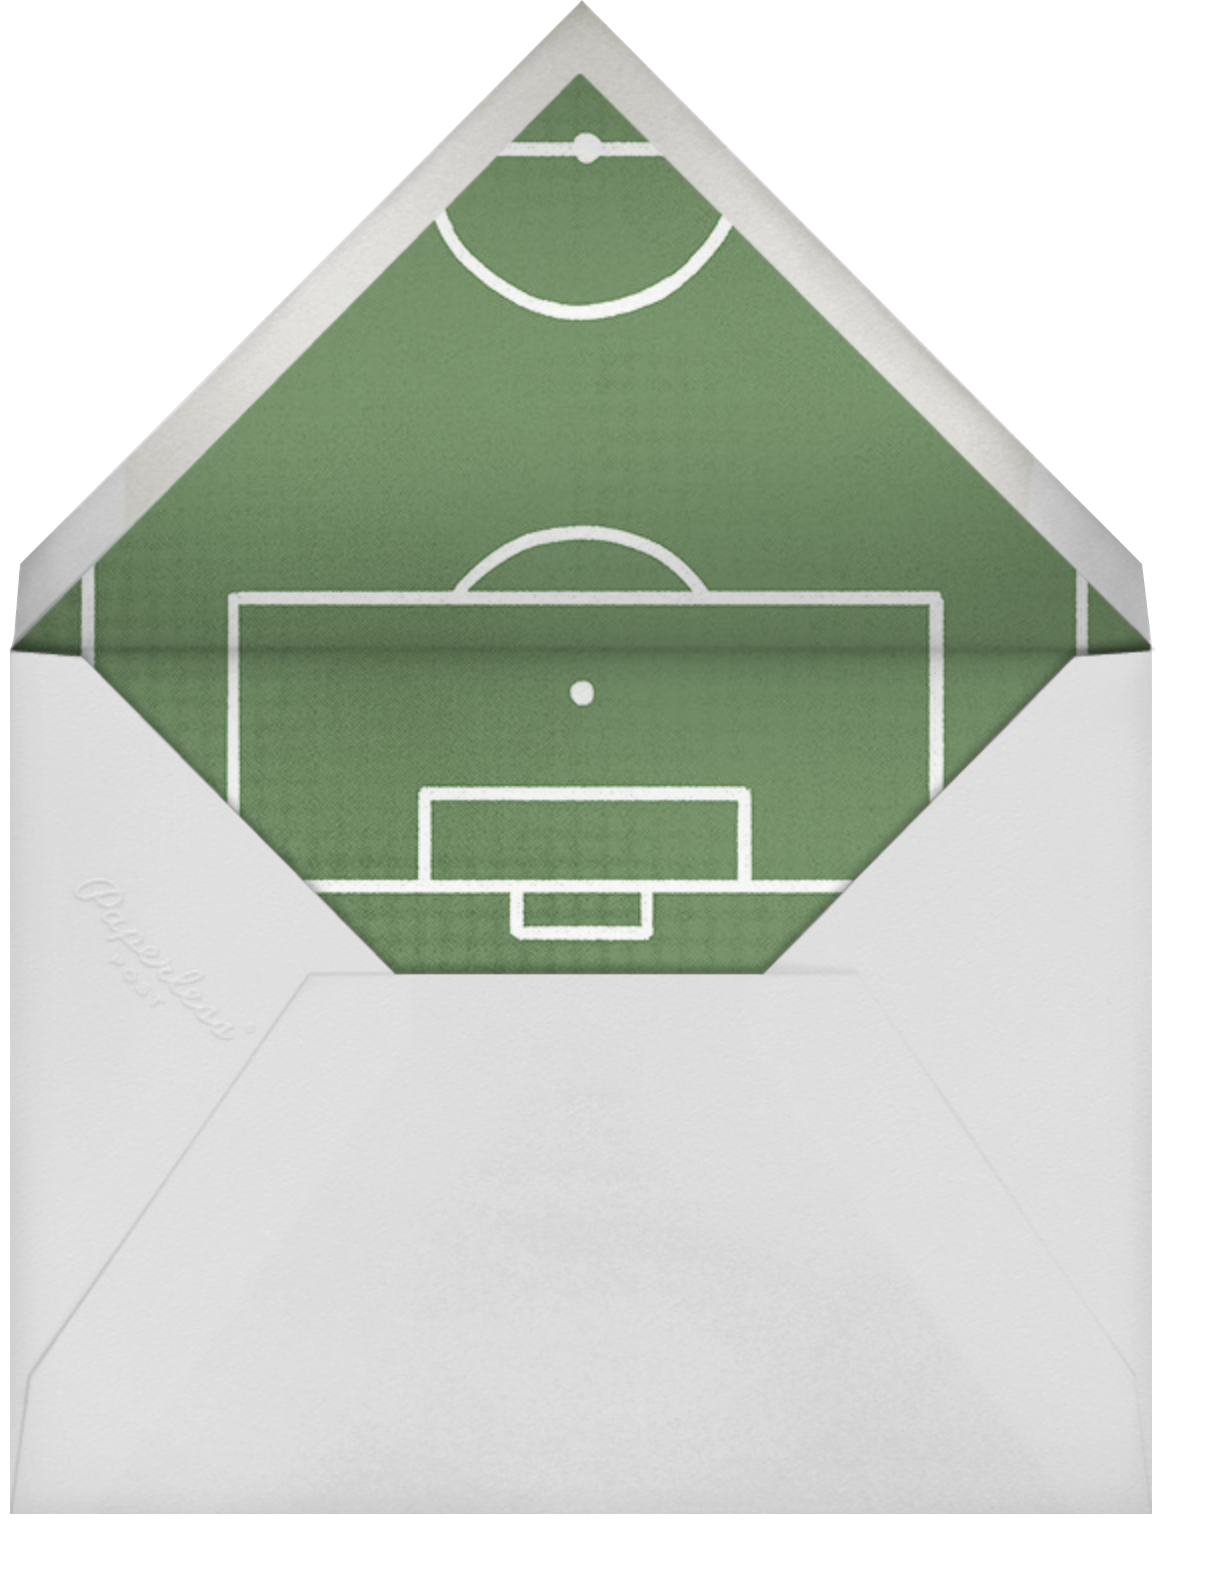 Courtside Seats - Soccer - Paperless Post - Envelope